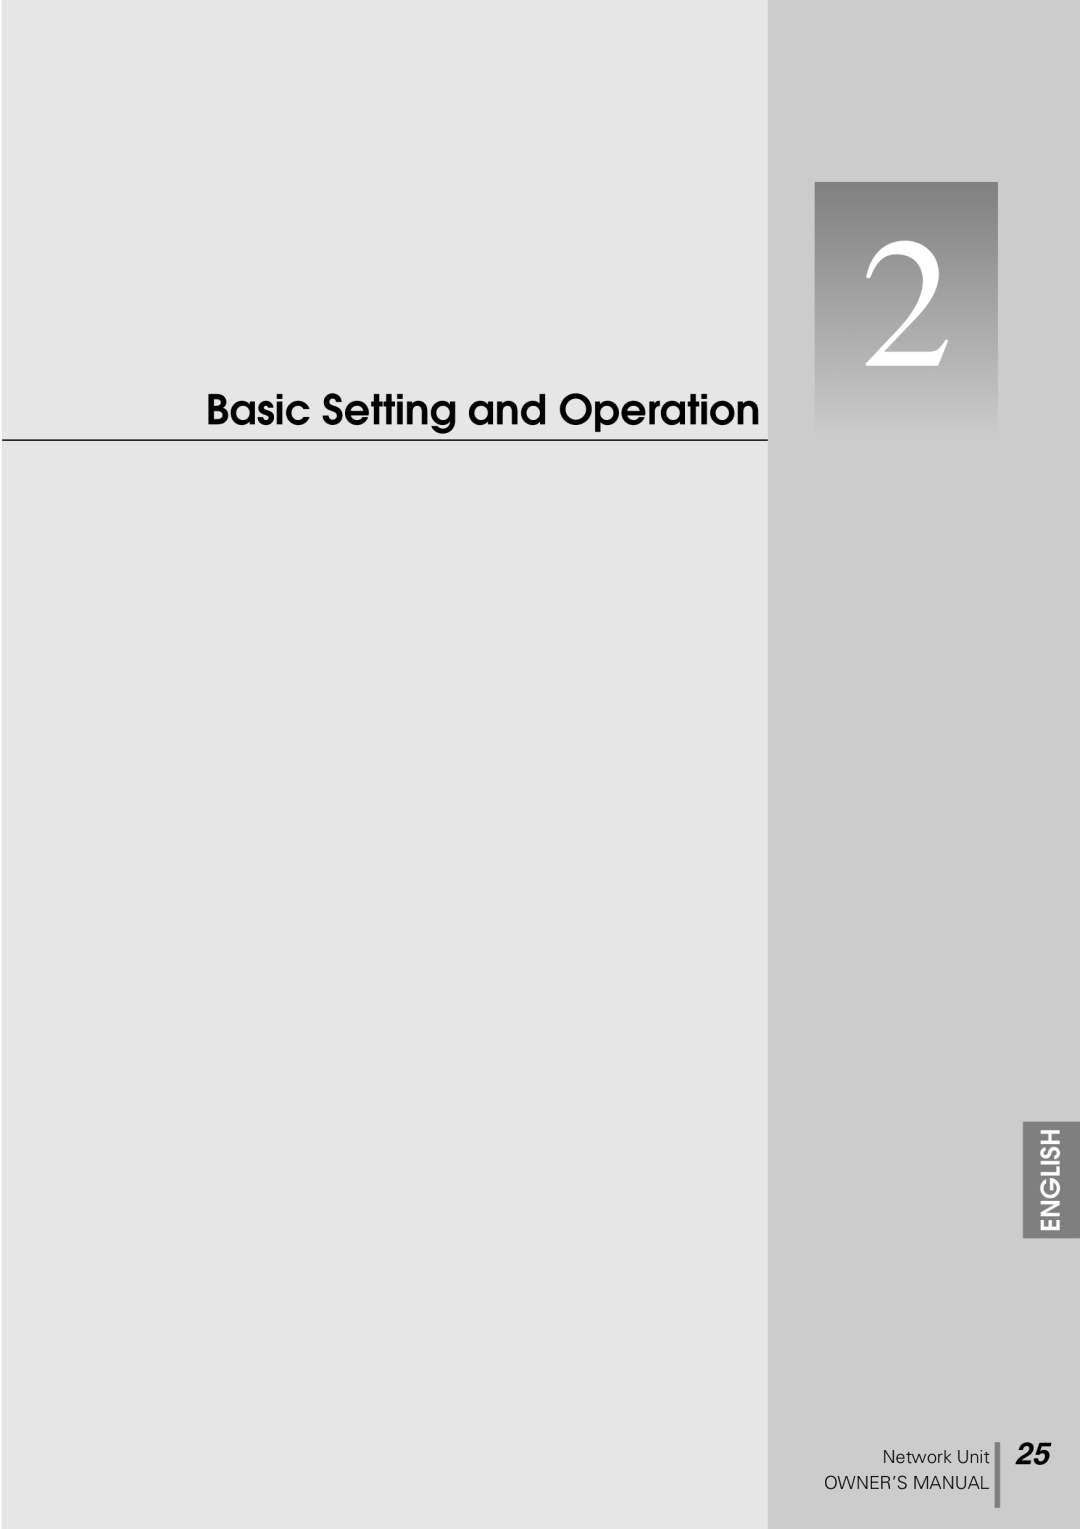 Sanyo POA-PN10 owner manual Basic Setting and Operation, English, Network Unit OWNER’S MANUAL 